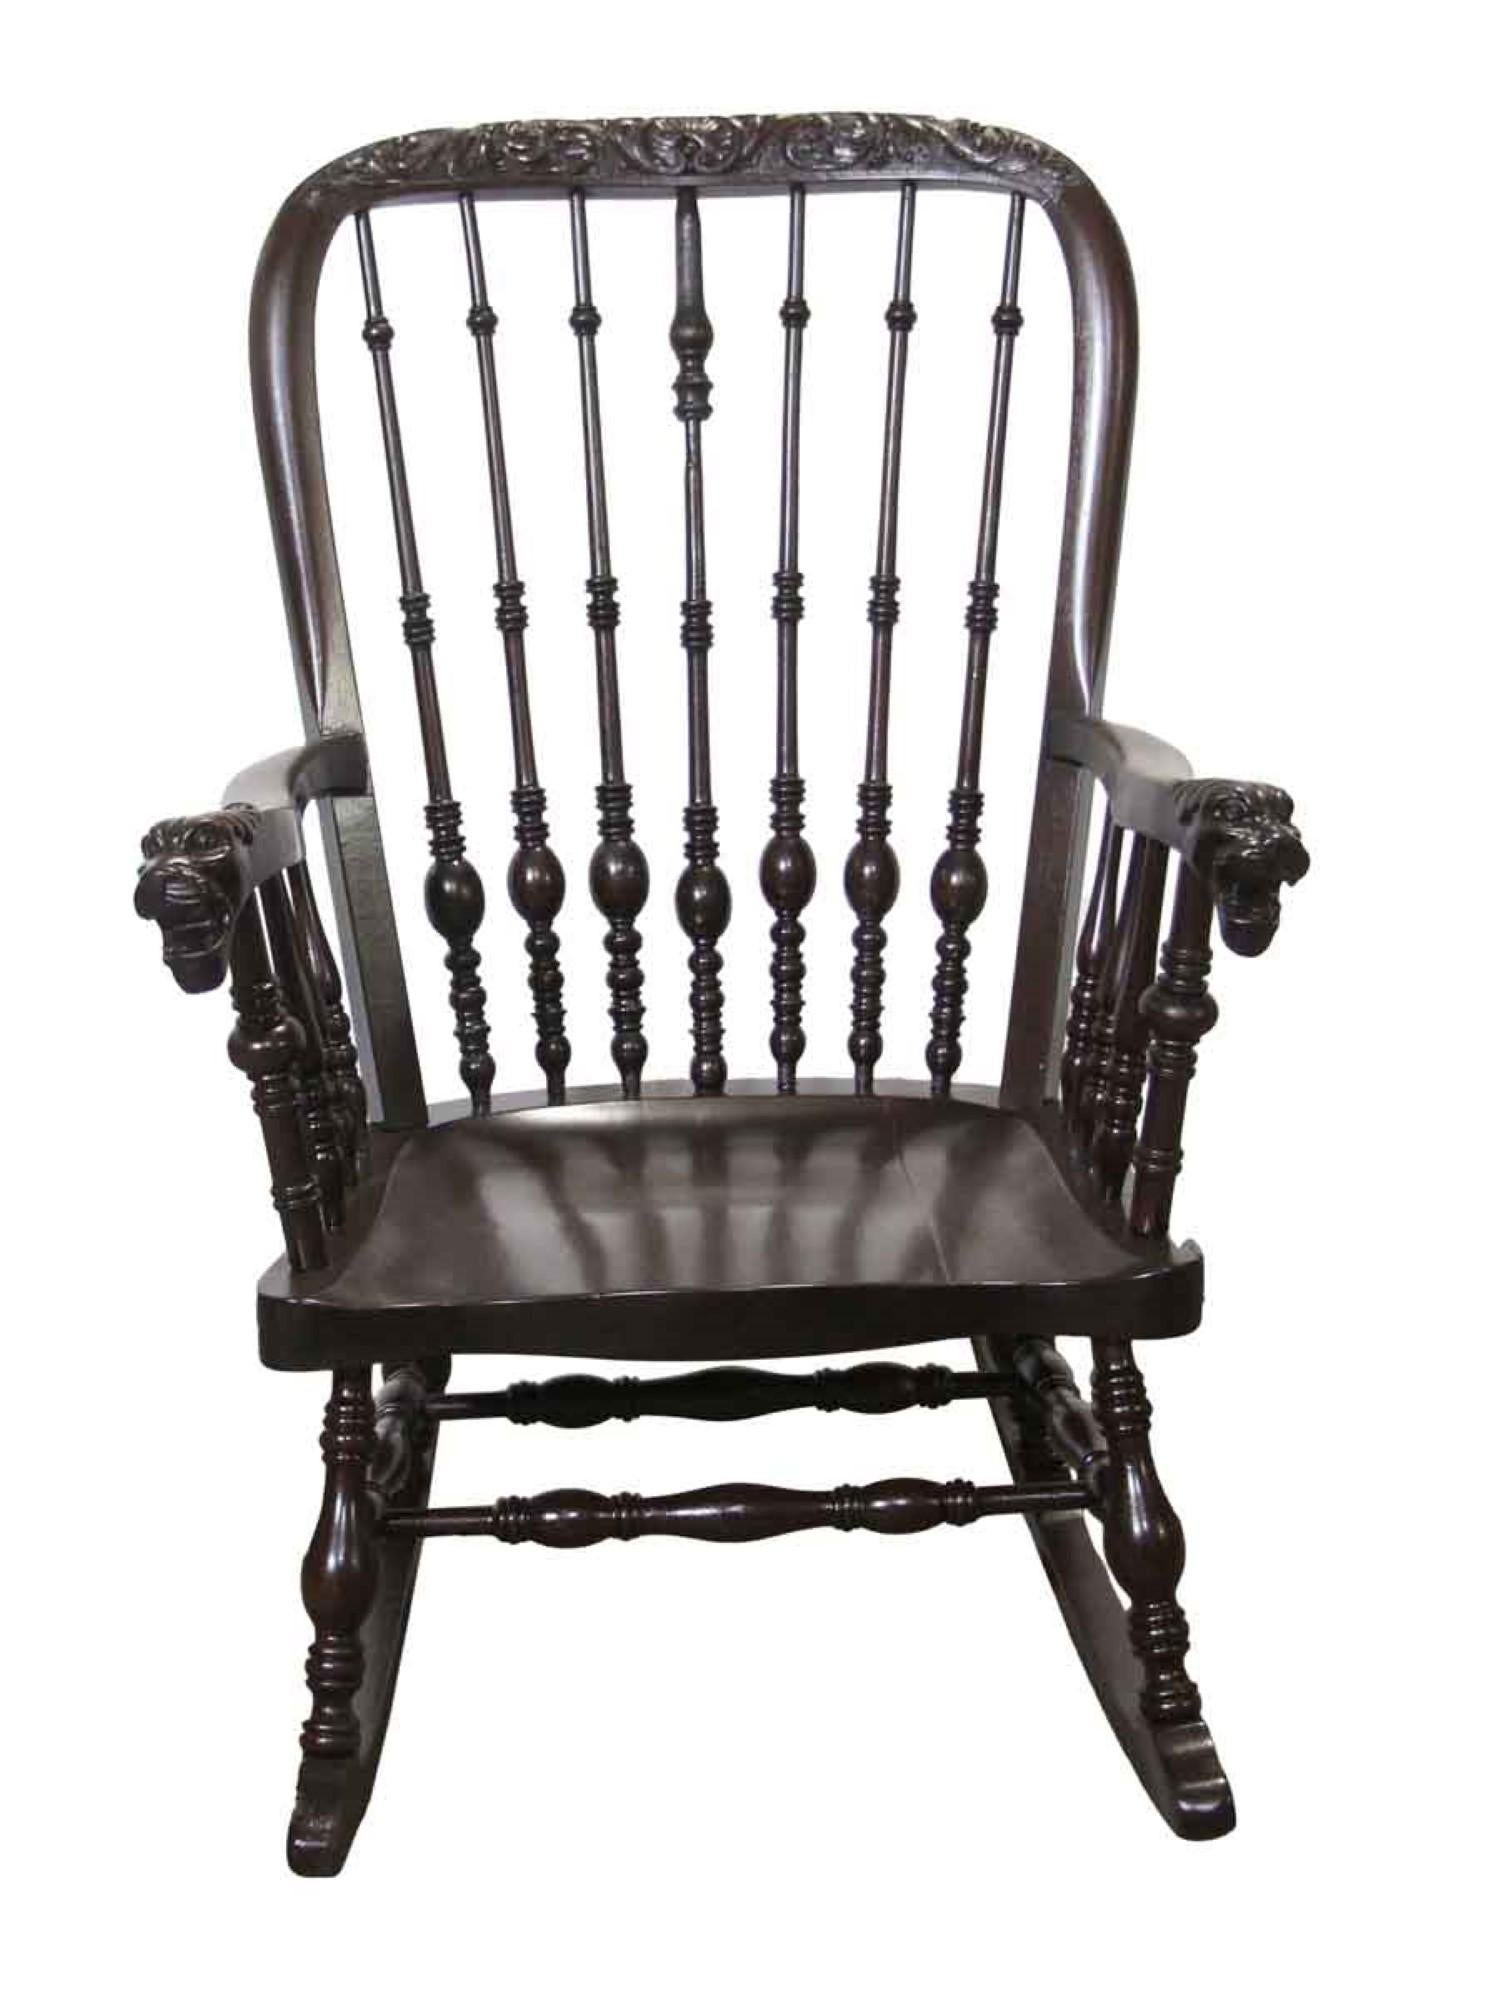 1890s antique dark tone oak carved Victorian rocking chair with griffon arm rests and floral carvings along the top part of the spindle back. This chair has been fully restored. This can be seen at our 400 Gilligan St location in Scranton, PA.